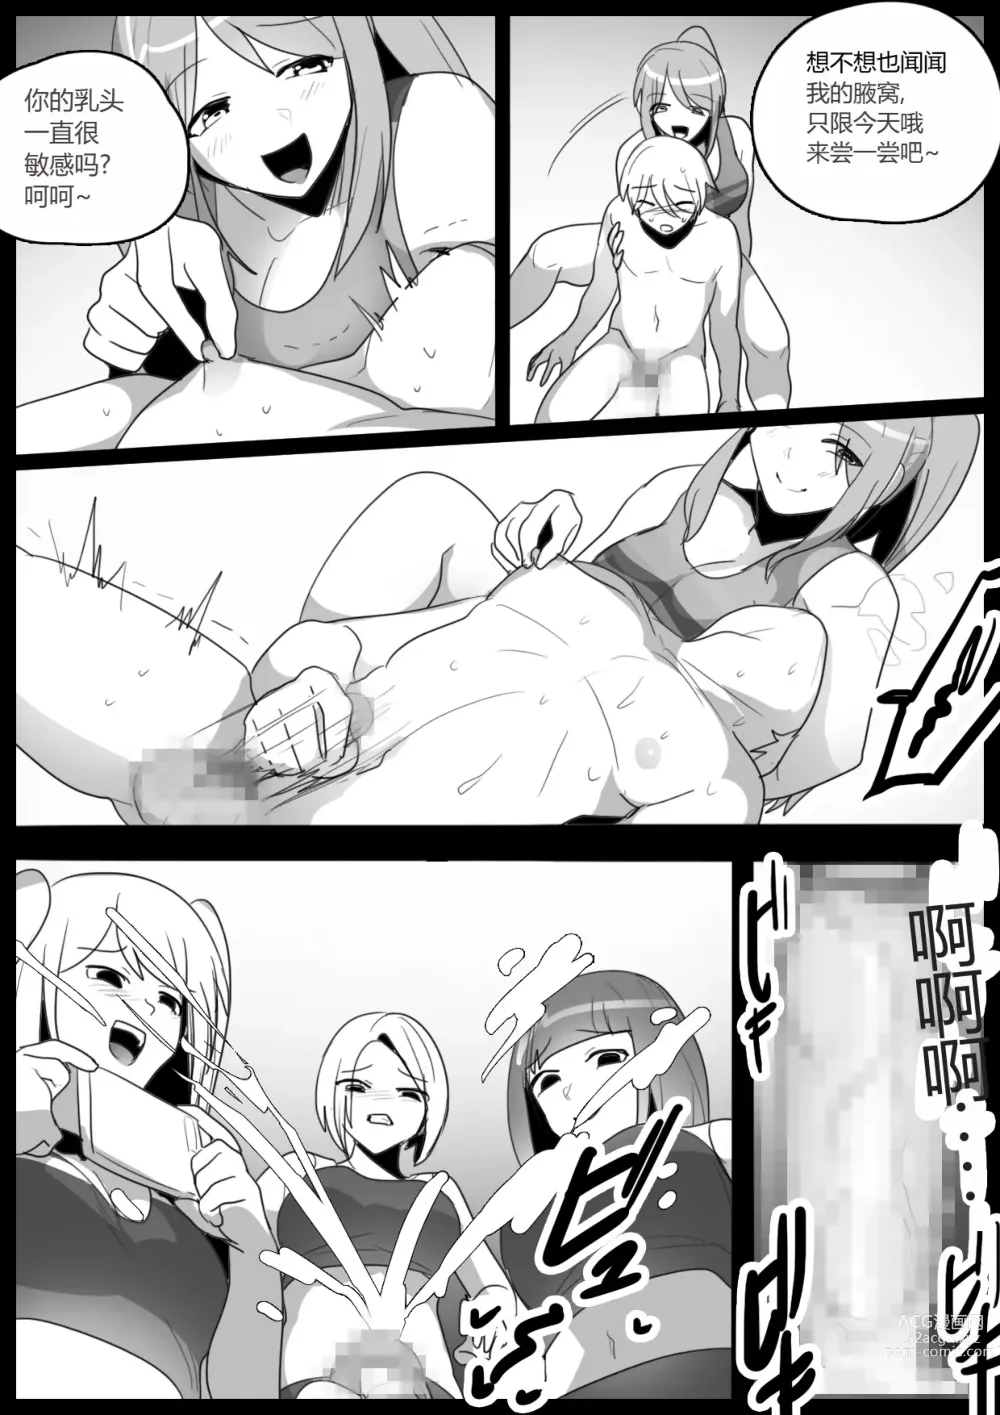 Page 21 of doujinshi Spin-Off of Girls Beat by Rie